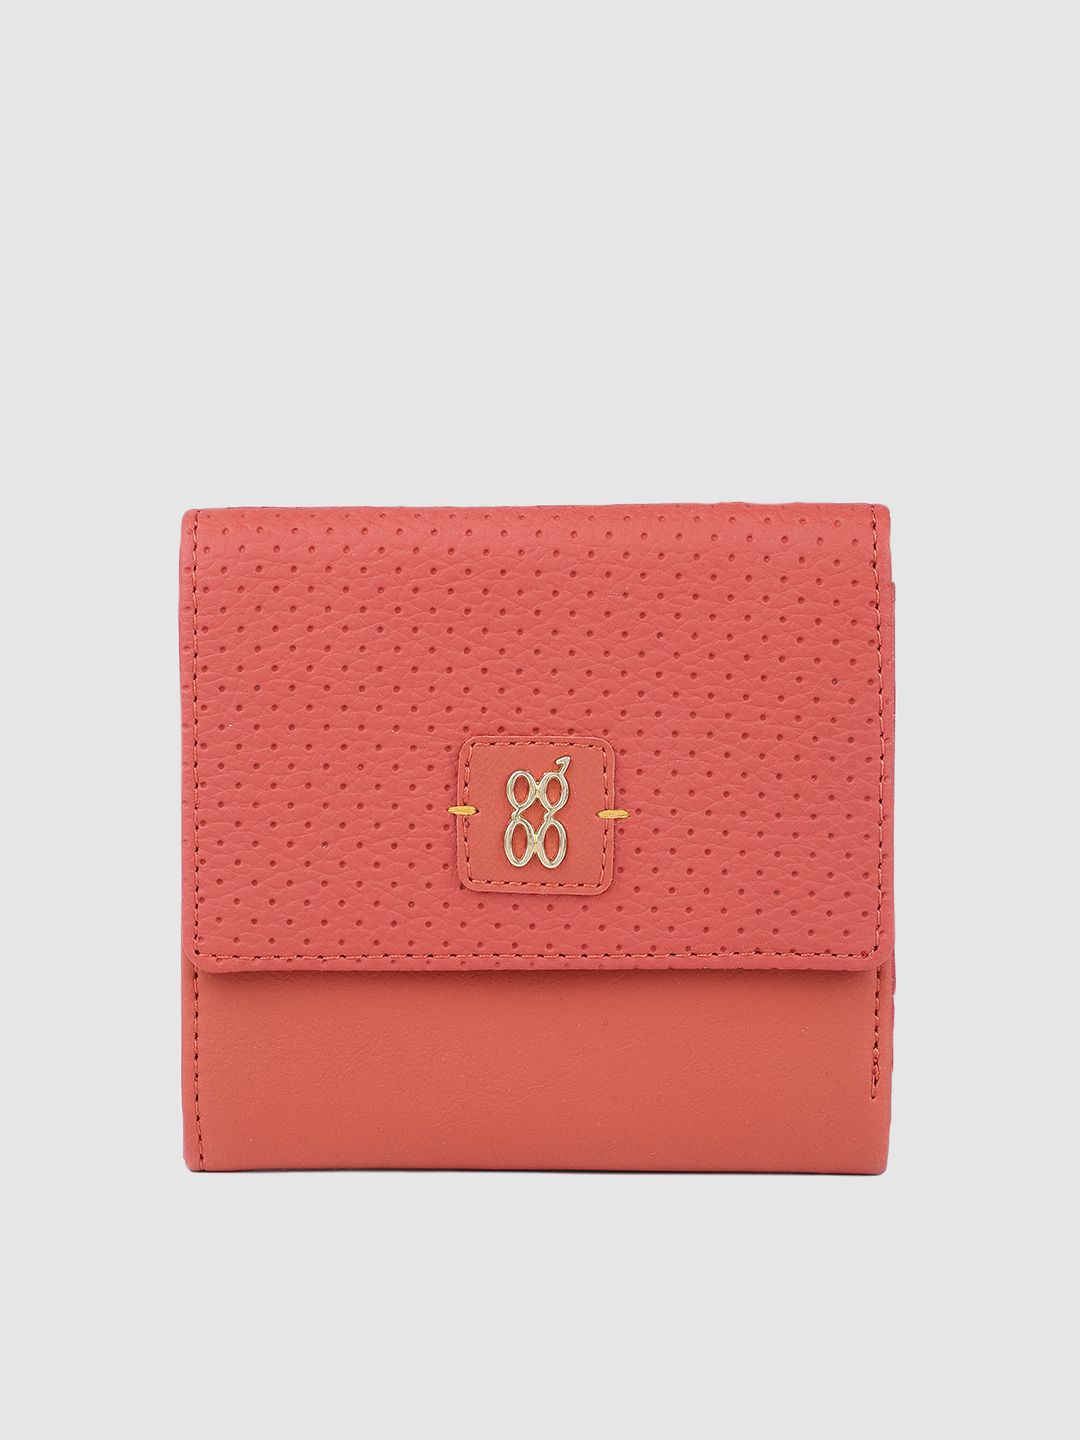 Baggit Women Peach-Coloured Three Fold Wallet Price in India